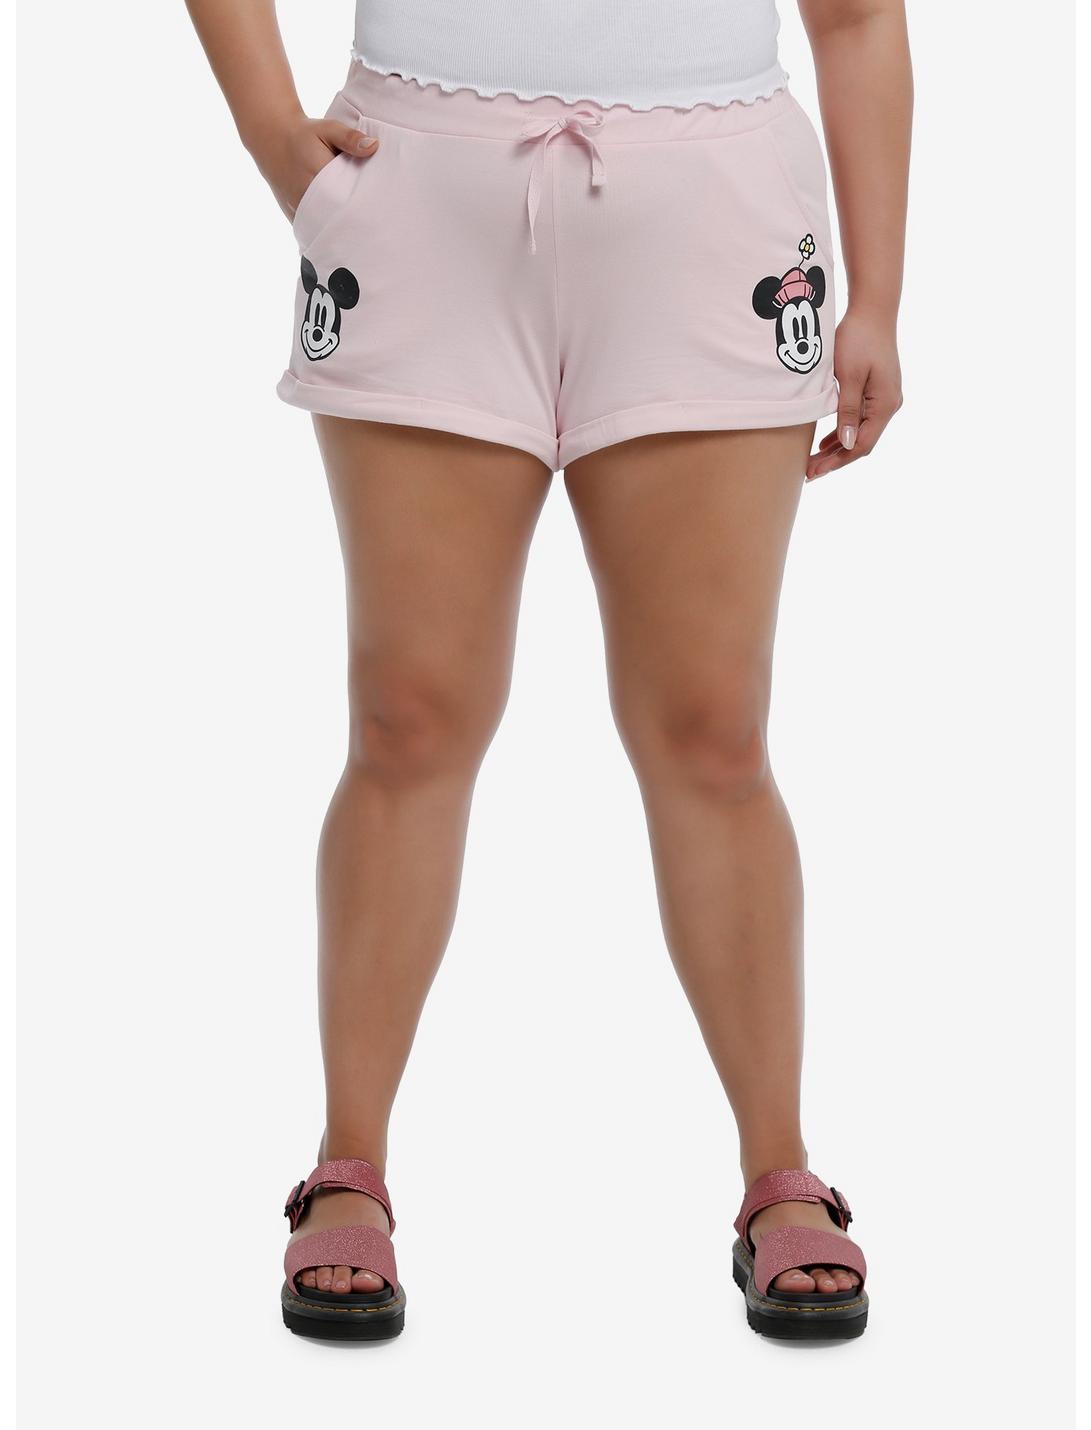 Her Universe Disney Mickey Mouse & Minnie Mouse Heart Girls Lounge Shorts Plus Size, PINK, hi-res